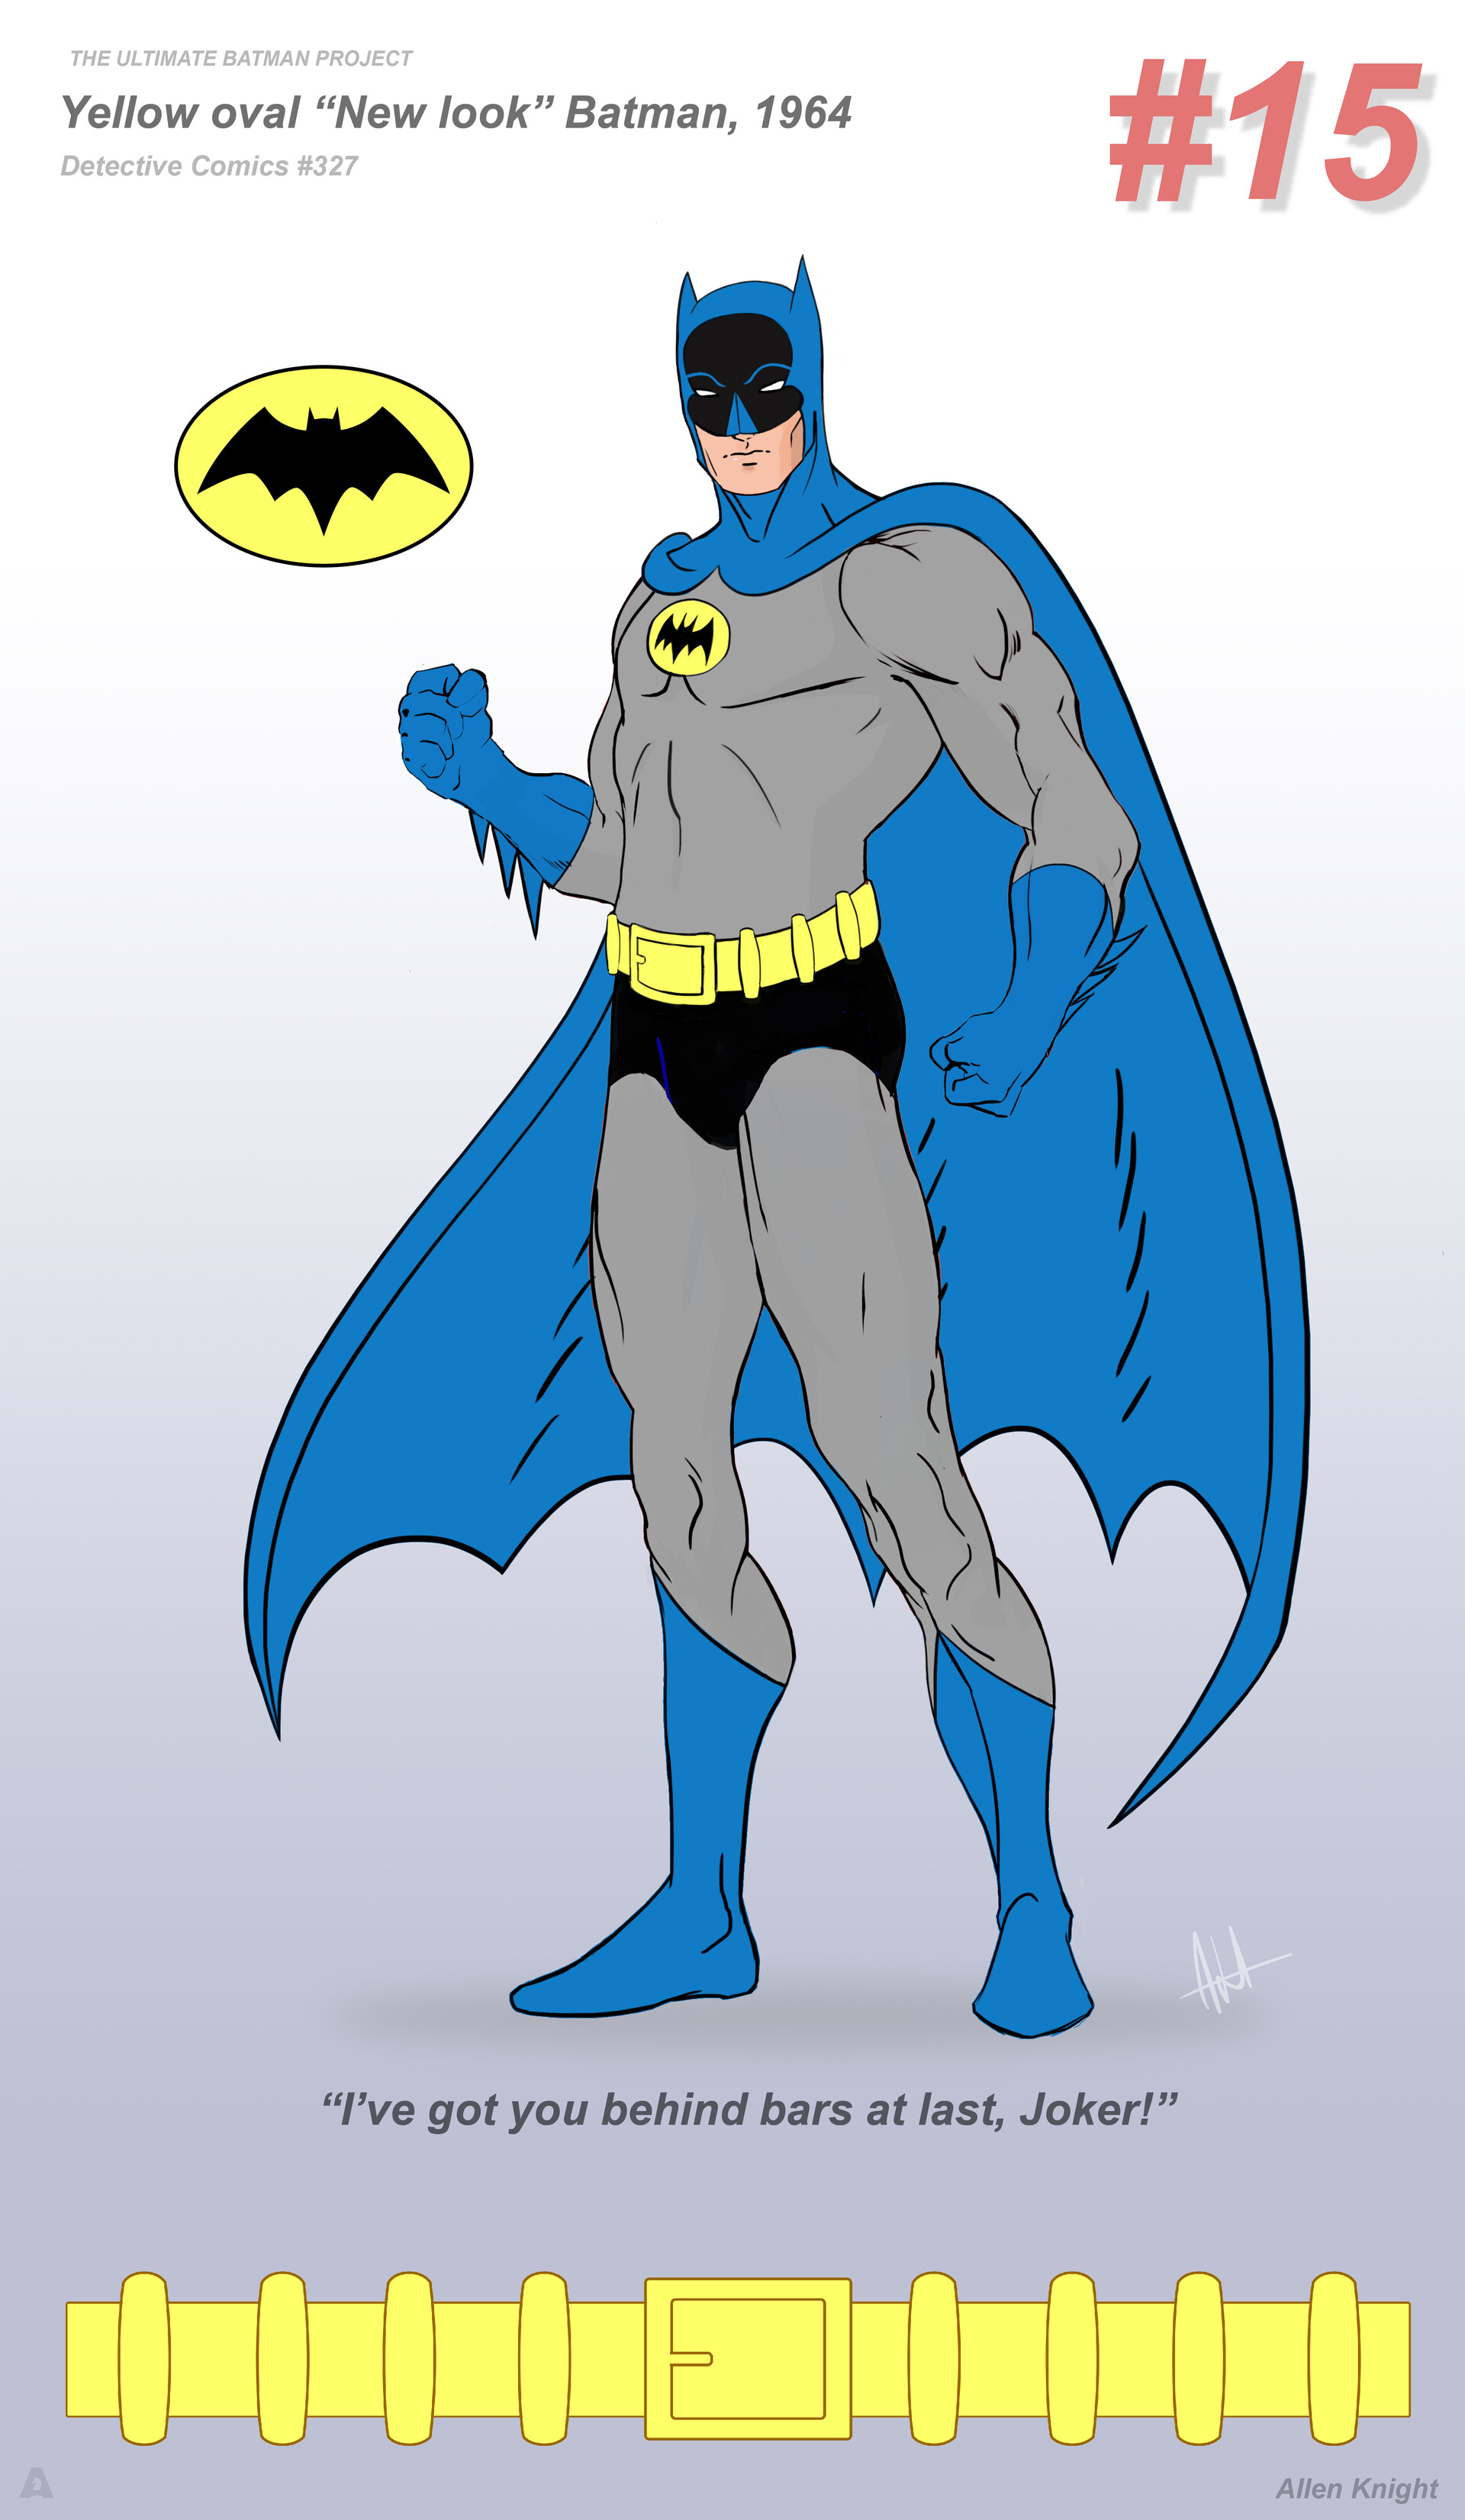 A Knight - The Ultimate Batman Project: Costume #15 - Yellow Oval 